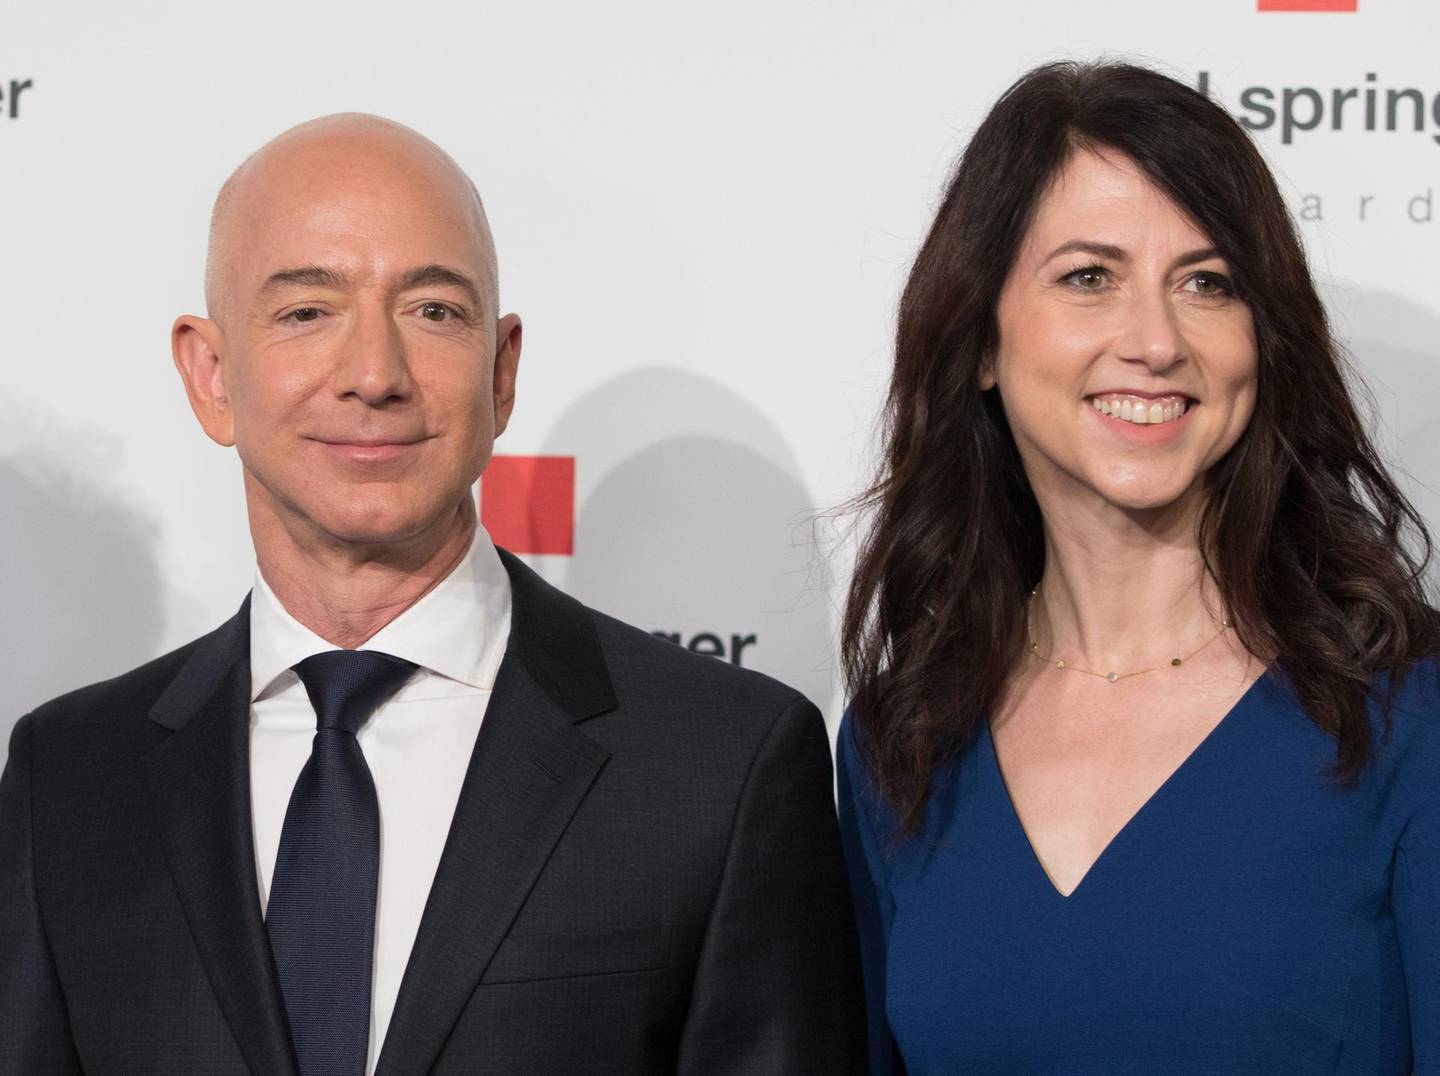 (FILES) In this file photo taken on April 24, 2018 Amazon CEO Jeff Bezos and his wife MacKenzie Bezos  poses as they arrive at the headquarters of publisher Axel-Springer where he will receive the Axel Springer Award 2018 in Berlin. Amazon founder Jeff Bezos, rated the world's wealthiest person, announced on January 9, 2019 on Twitter that he and his wife Mackenzie Bezos were divorcing after a long separation. "We want to make people aware of a development in our lives," Jeff Bezos, 54, and MacKenzie Bezos, 48, said in joint statement posted to Bezos' Twitter feed.
 / AFP / dpa / JORG CARSTENSEN
